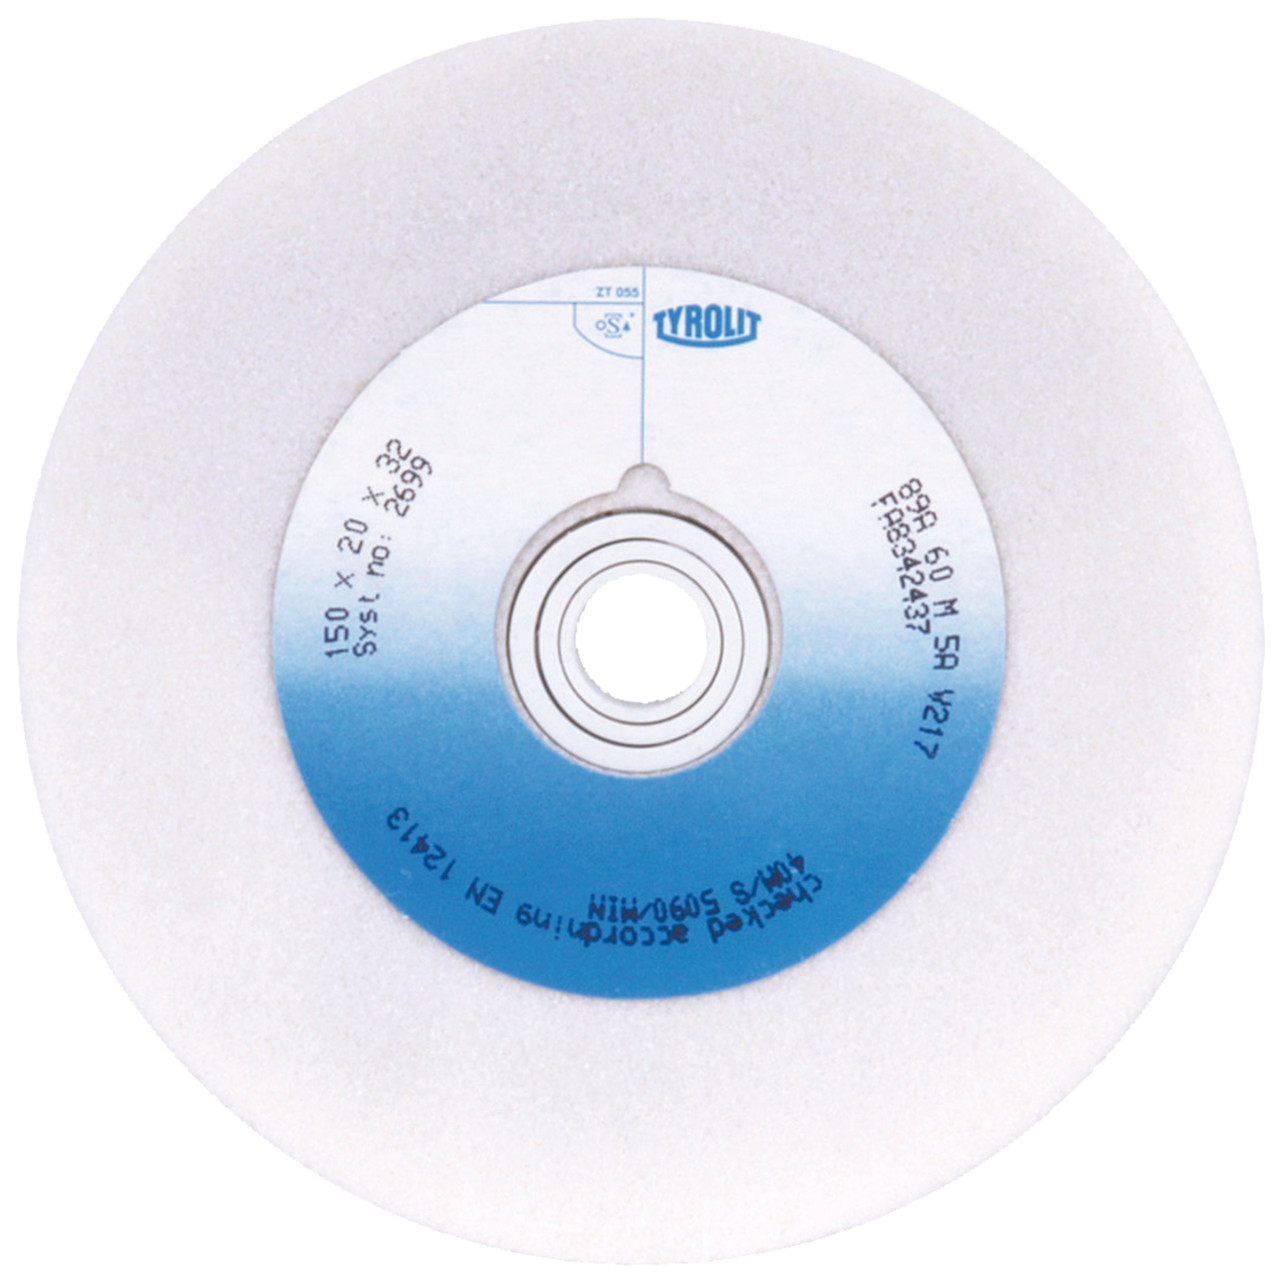 Tyrolit Conventional ceramic grinding discs DxDxH 300x40x40 For high-alloy steels and HSS, shape: 1, Art. 34046794